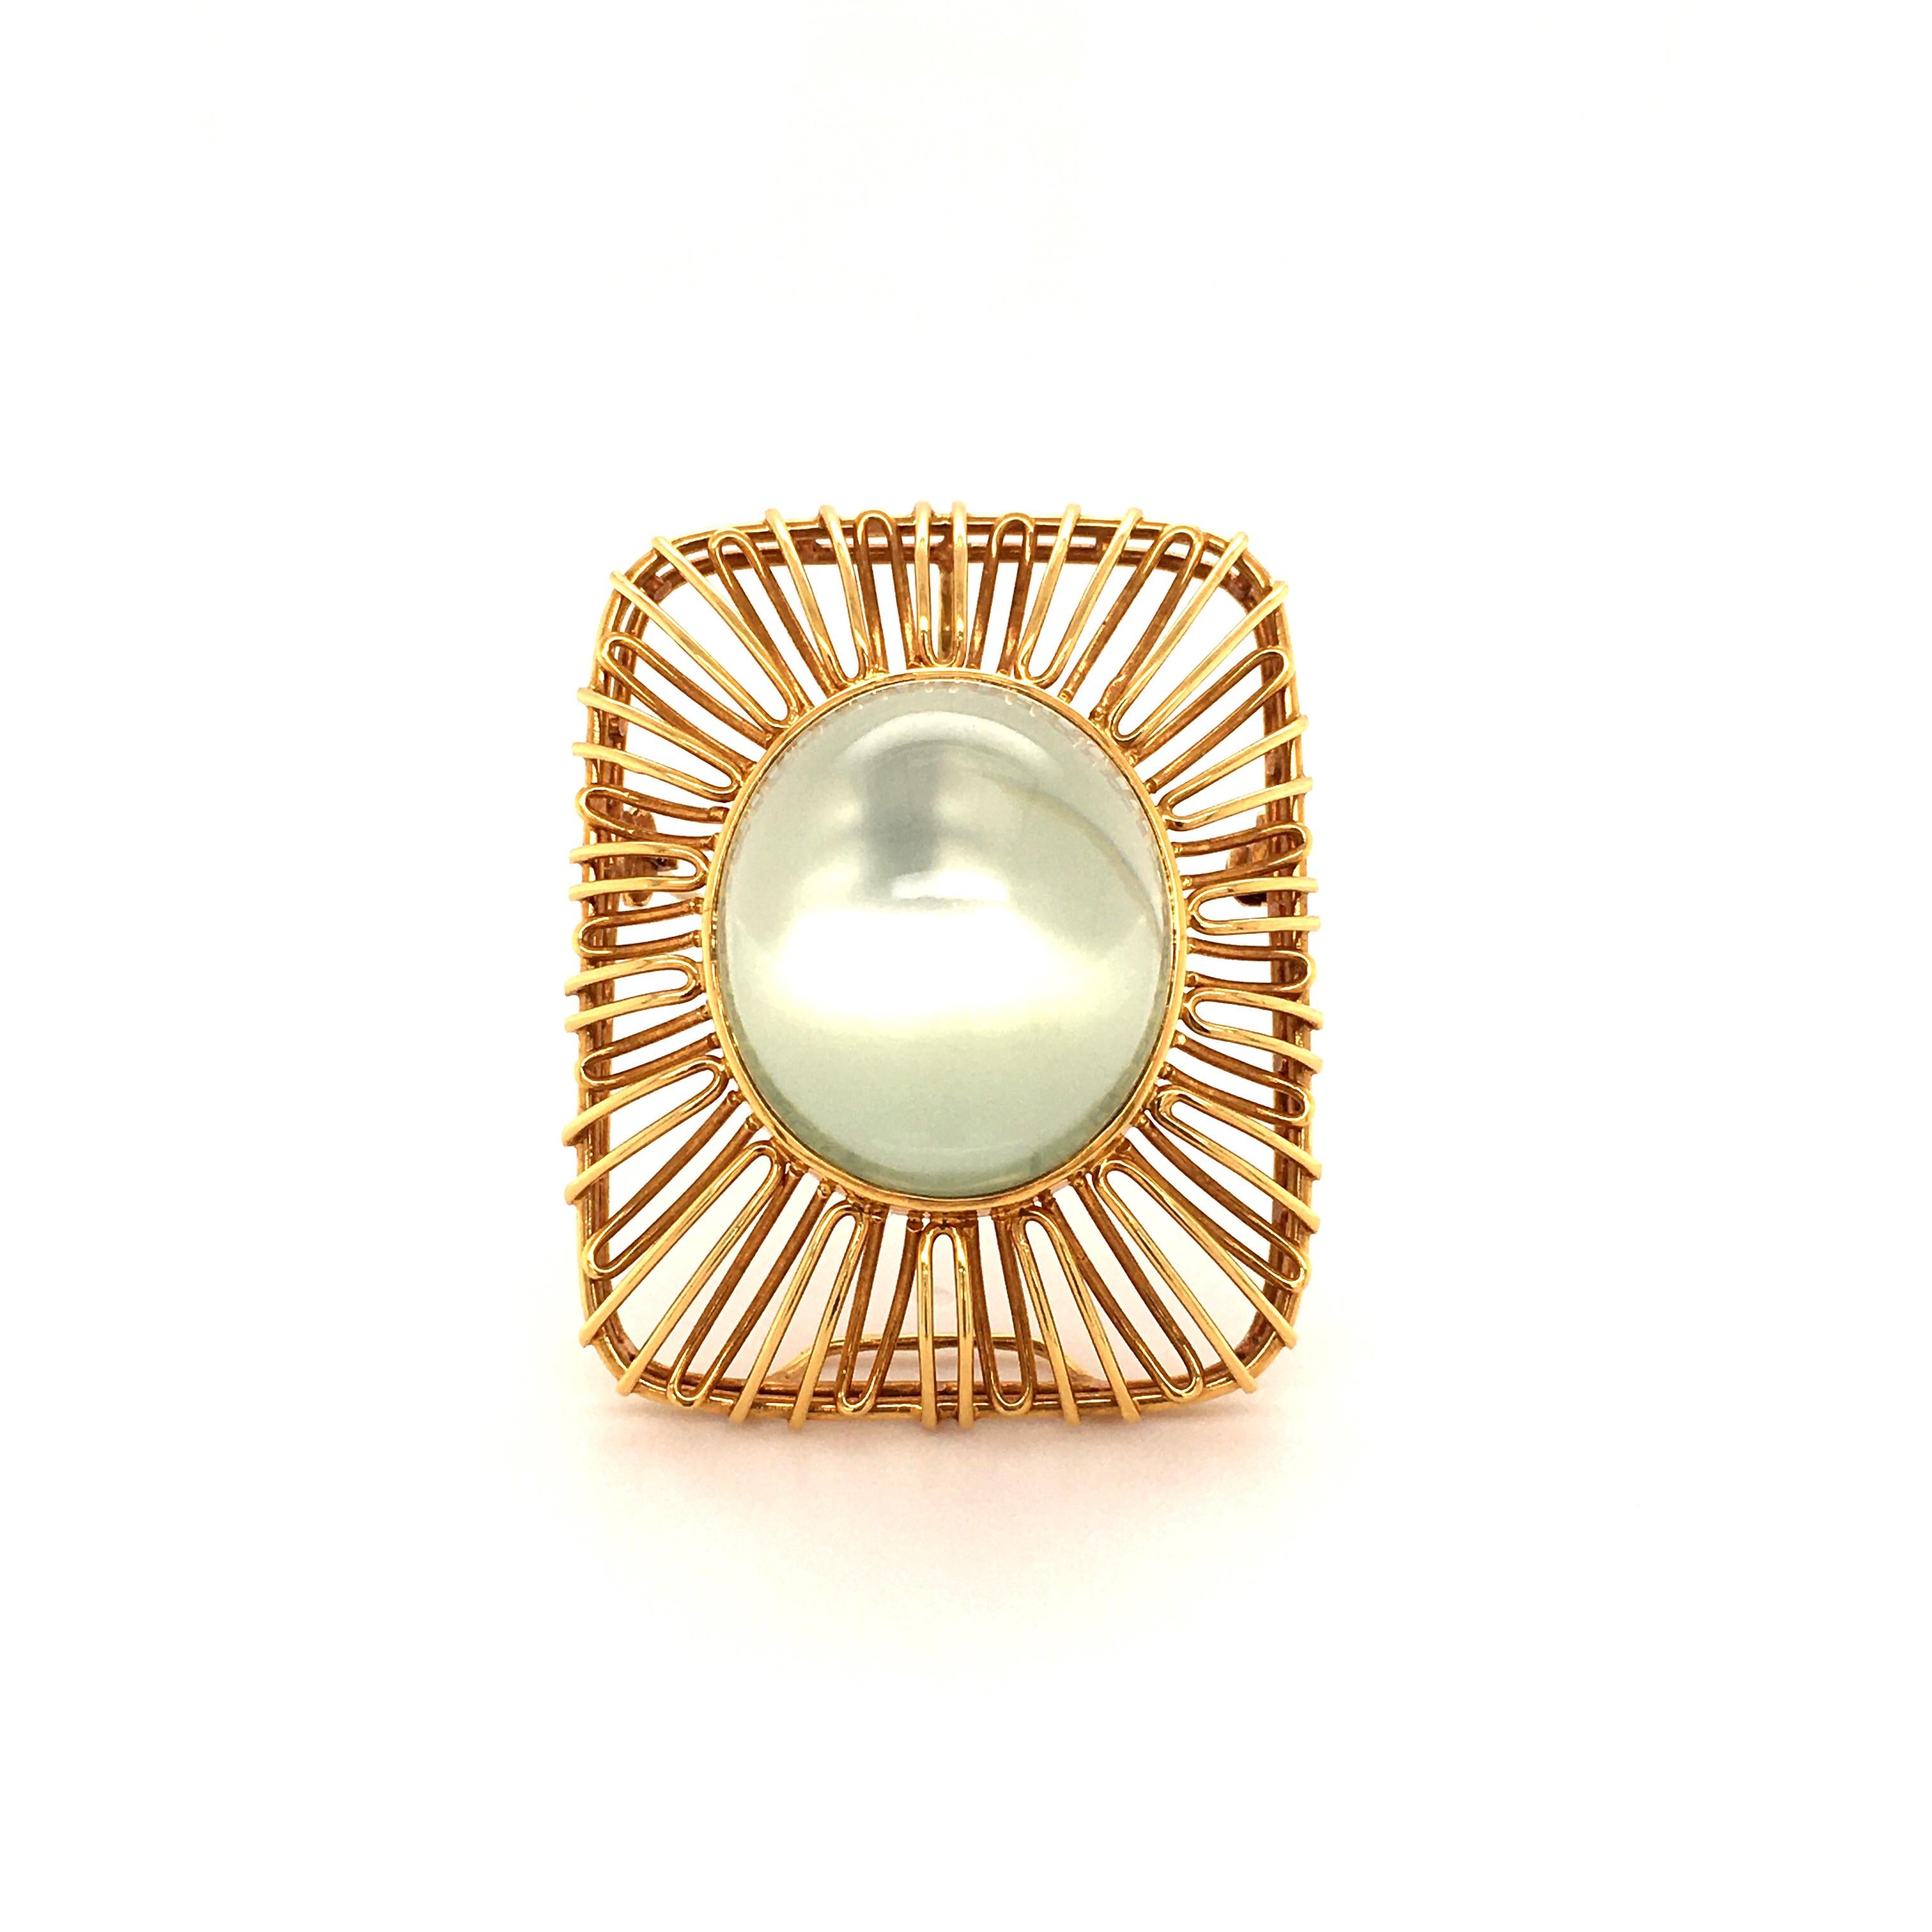 This mesmerizing light green moonstone cabochon of circa 40.00 carats is bezel set in a beautifully handcrafted brooch. Can also be worn as a pendant. 
Setting in 18 karat yellow gold.

Maker's mark: Merz
Hallmark: 750